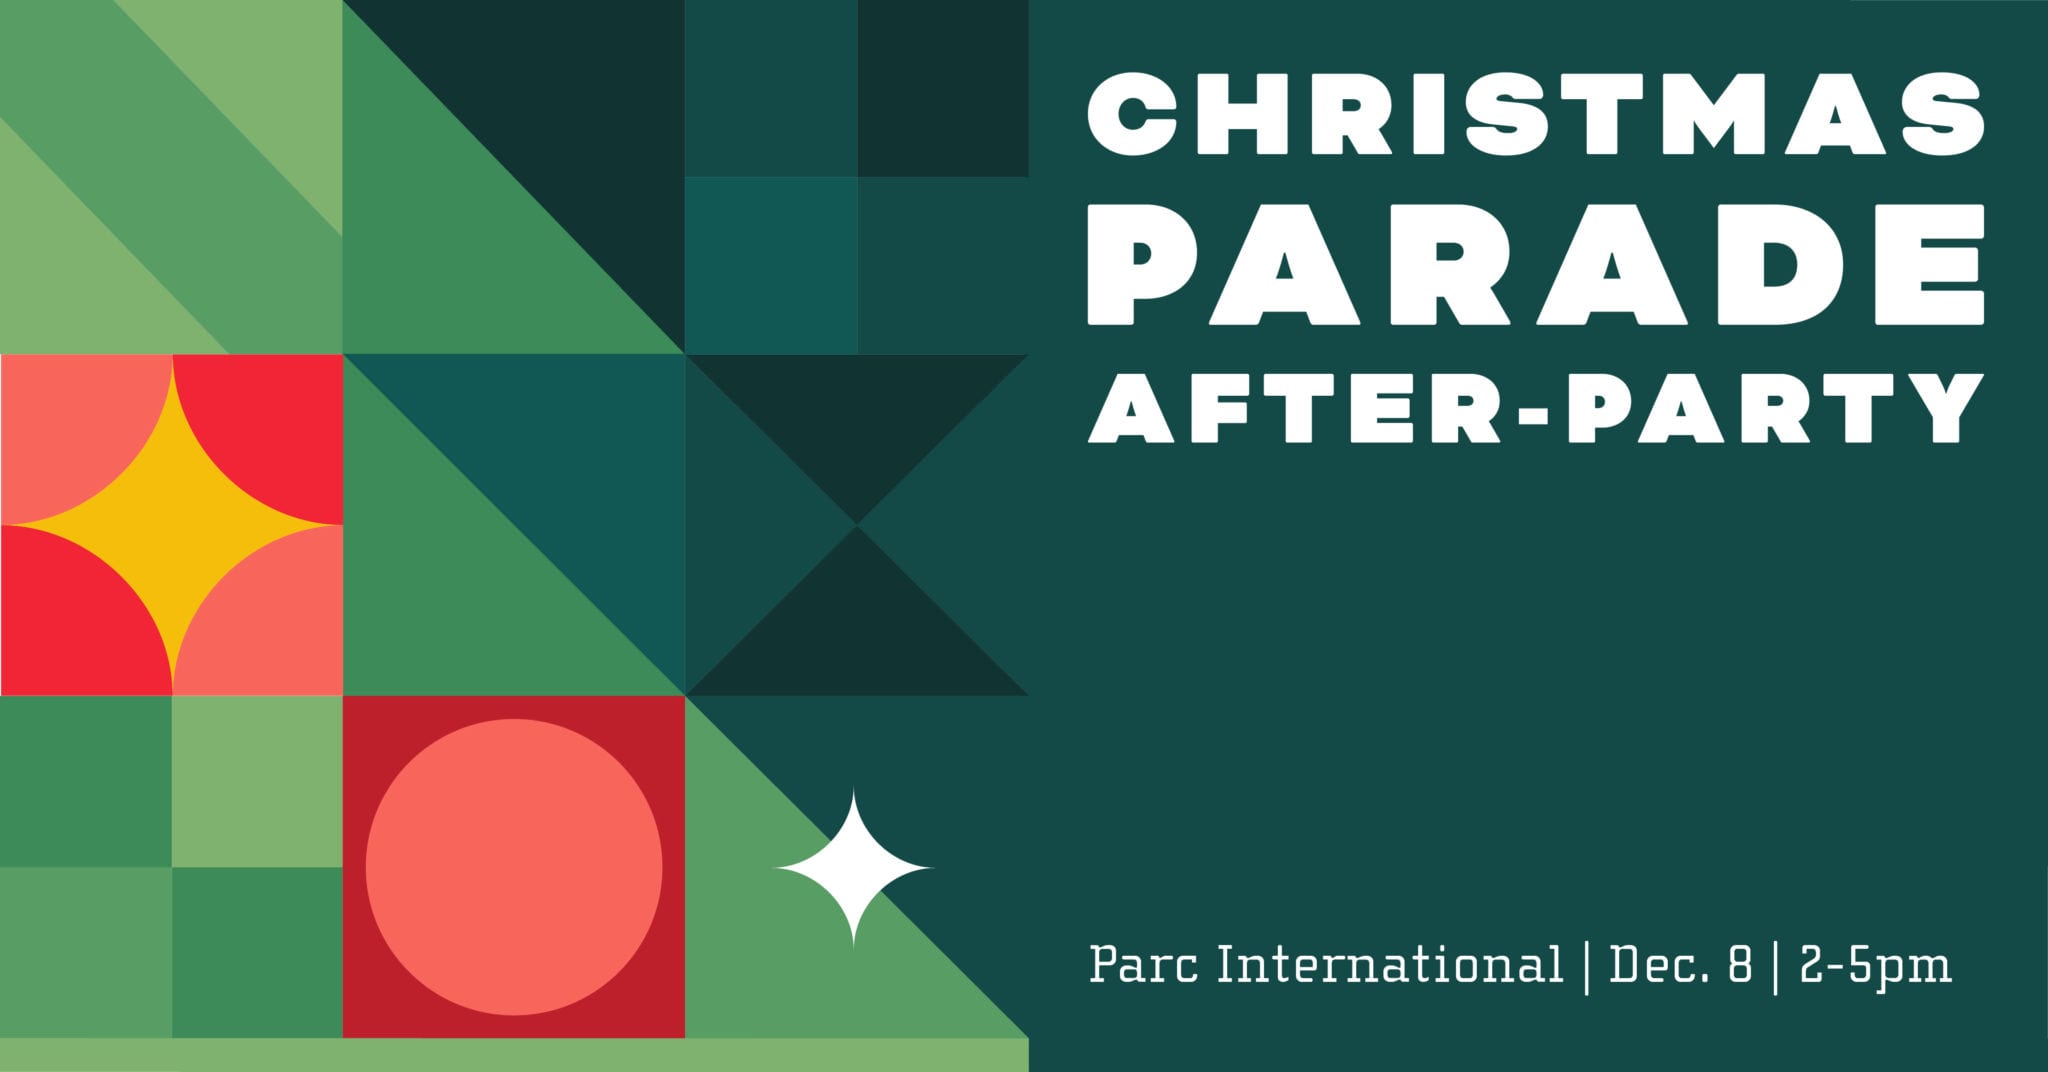 Sonic Christmas Parade After-Party event graphic